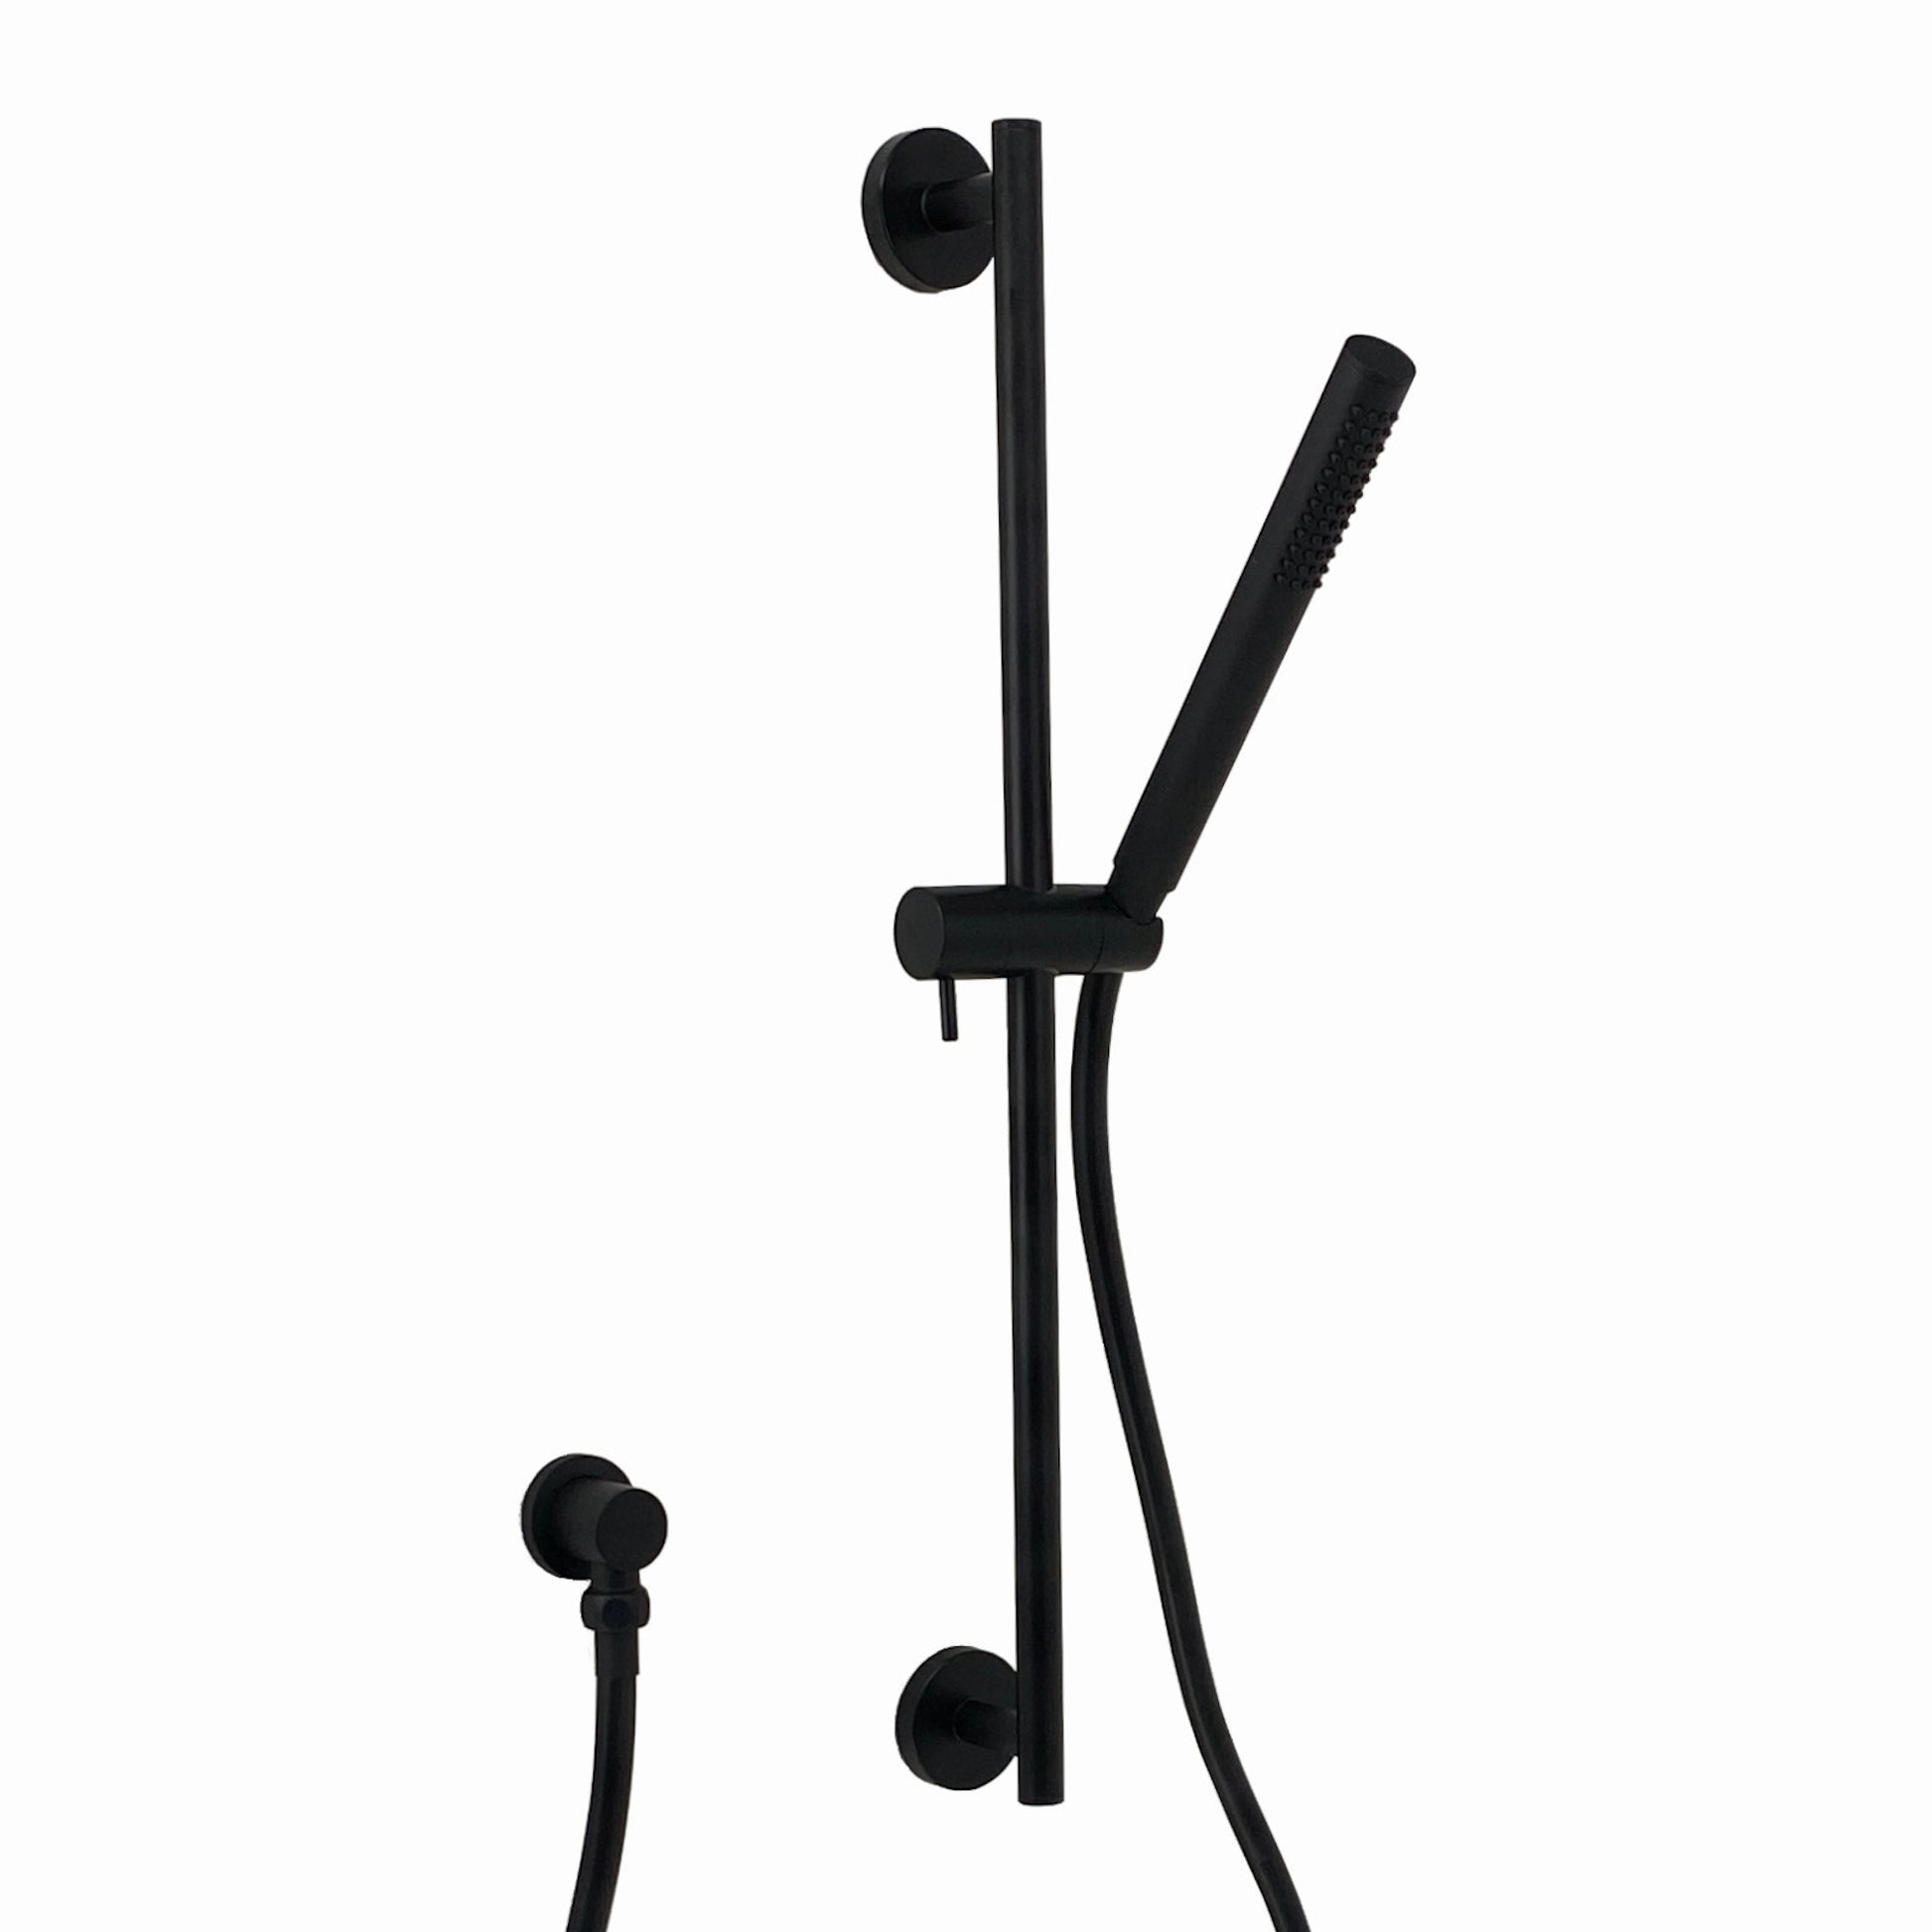 SH0303-04-SH0369-04-ES022-01-contemporary-shower-slider-riser-rail-kit-with-pencil-shower-head-hose-and-wall-elbow-matte-black